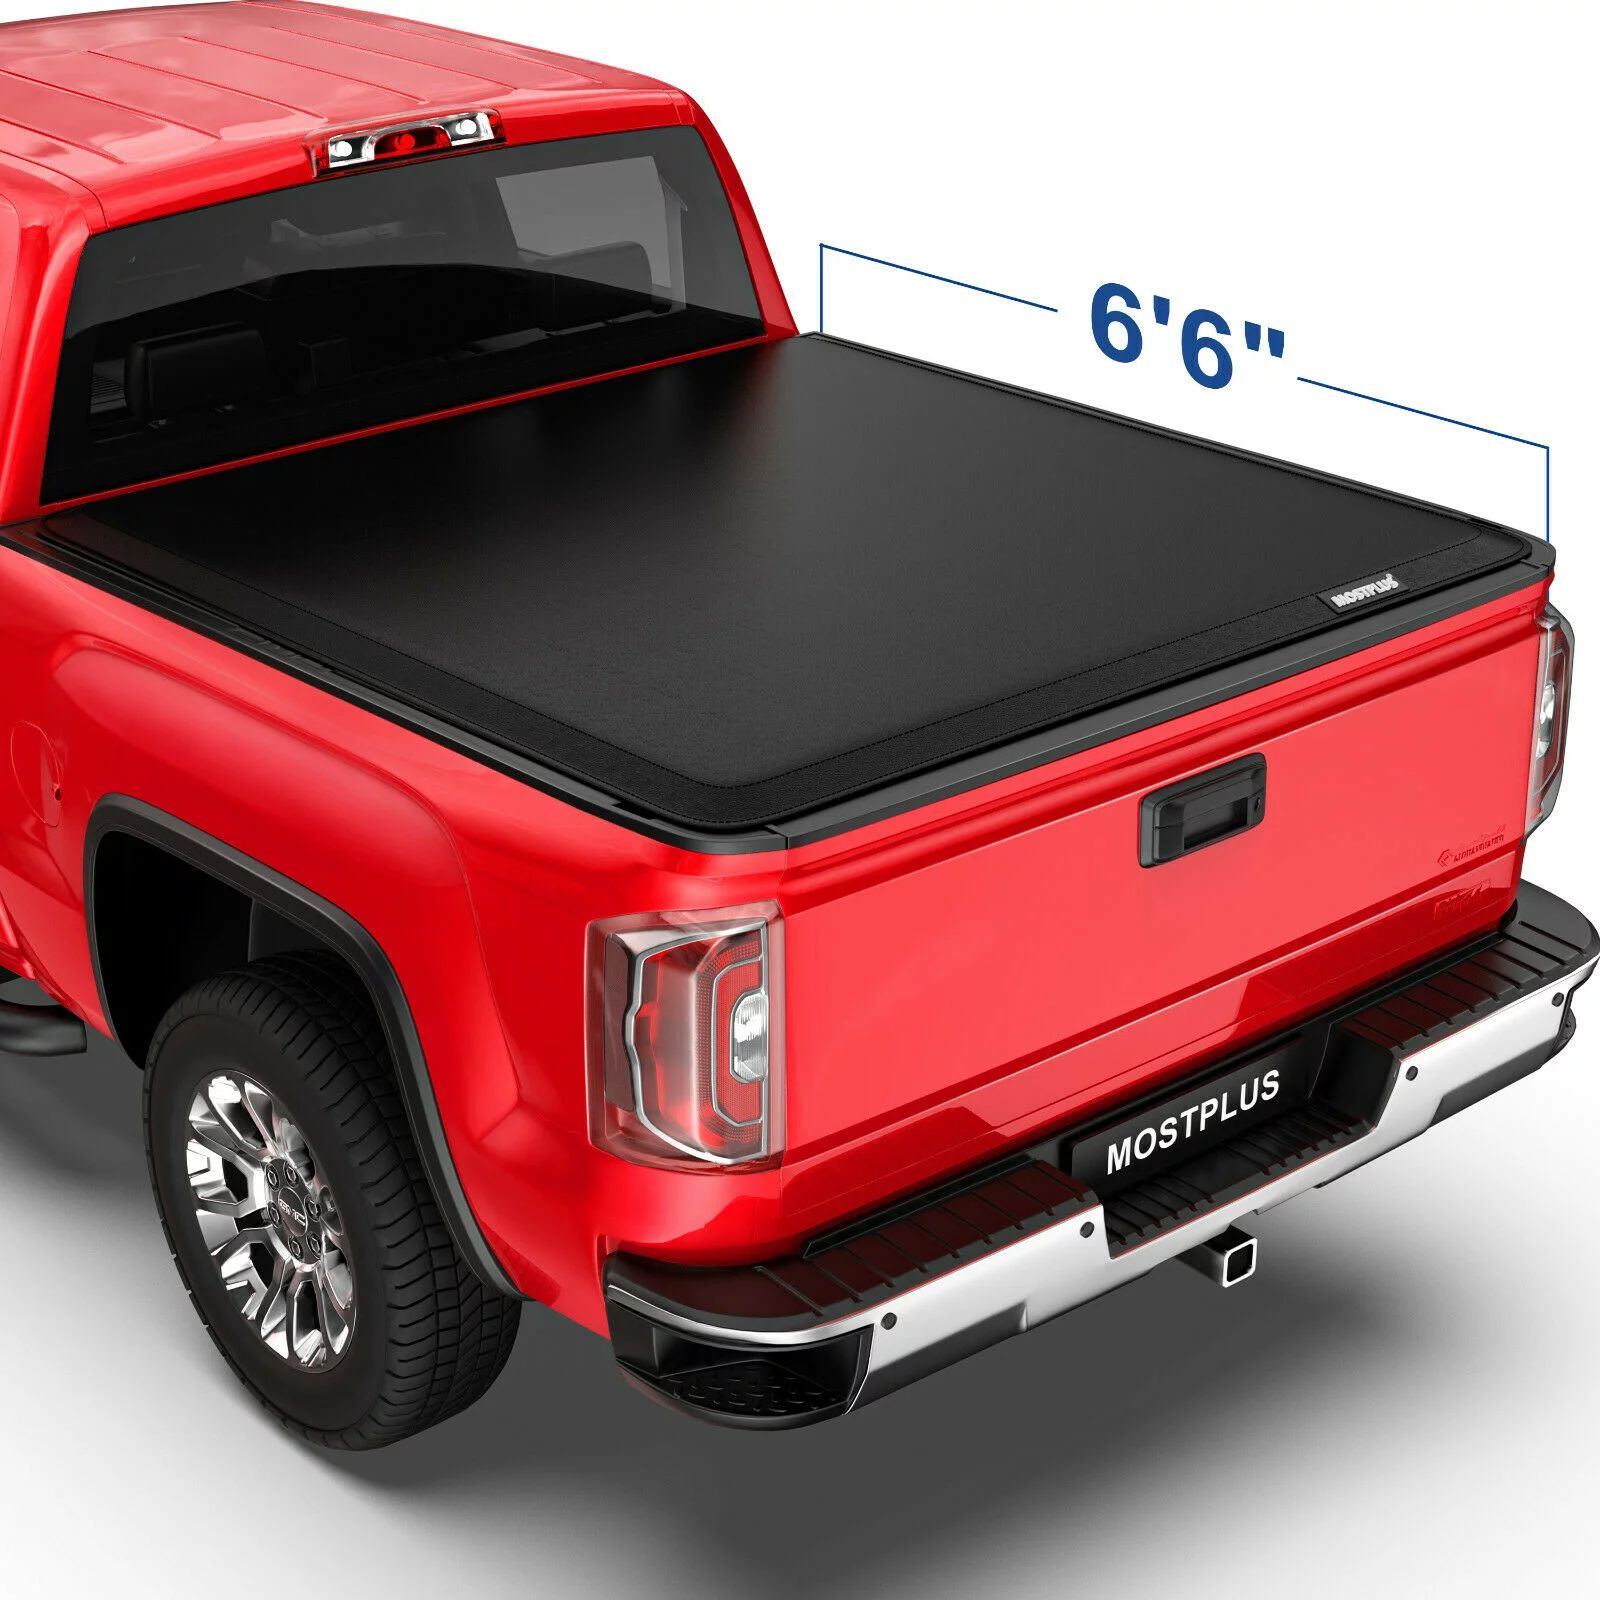 6.6FT Roll-up Truck Bed Tonneau Cover for 14-18 Silverado Sierra 1500/2500/3500 MOSTPLUS | Walmart (US)